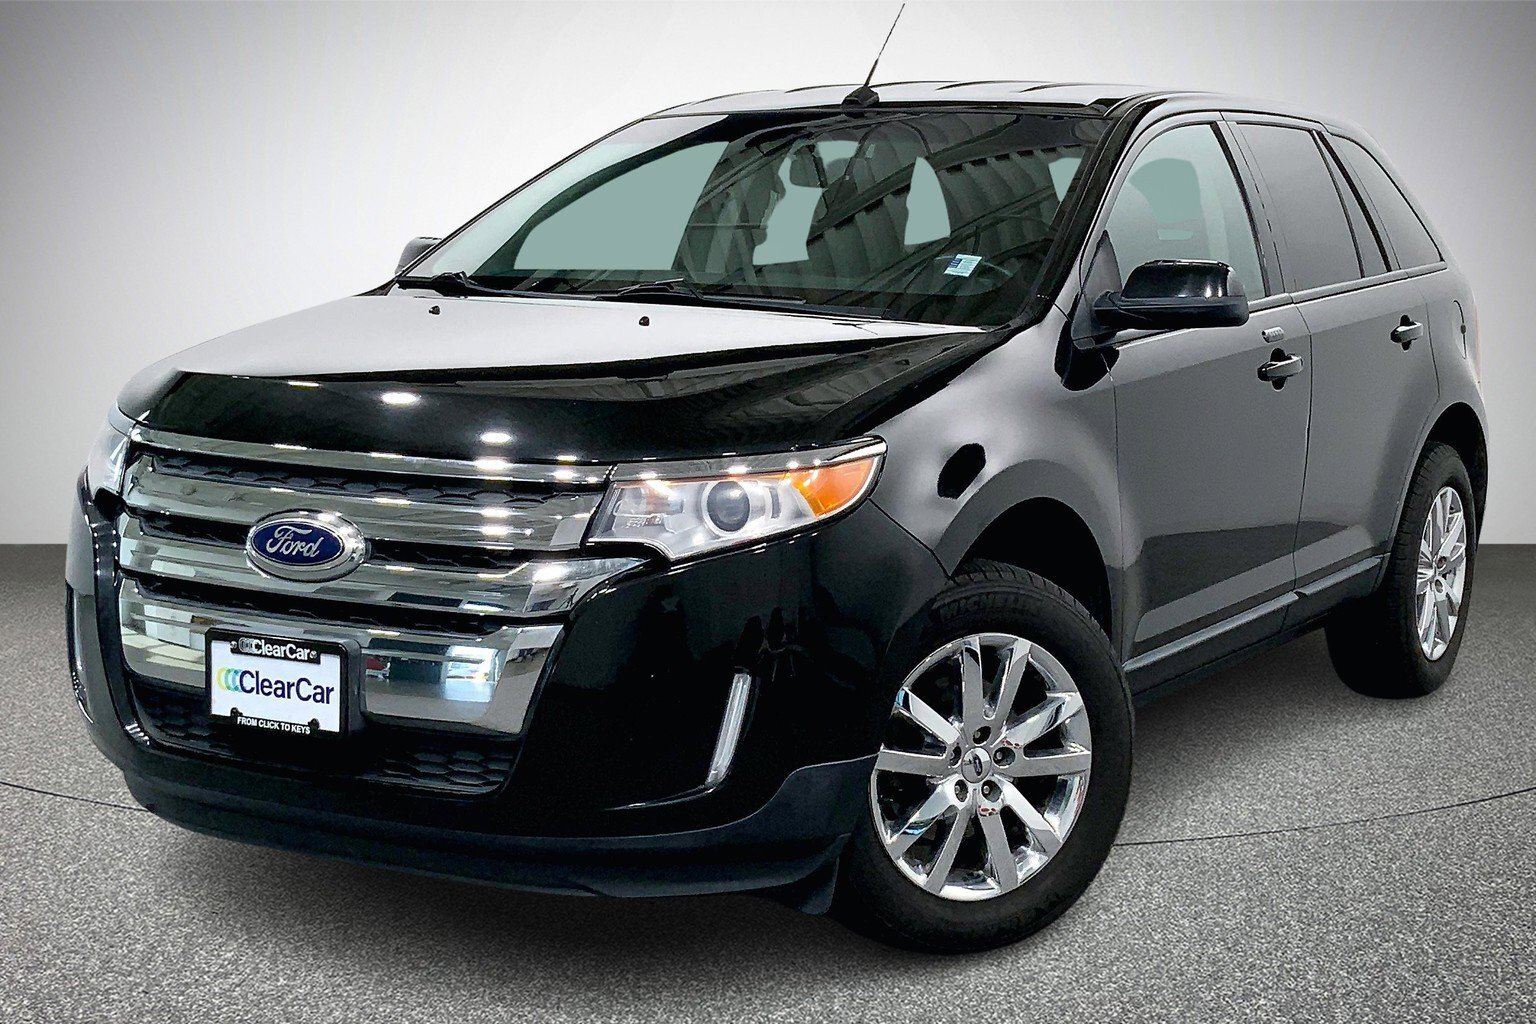 2014 Ford Edge 4dr SEL FWD